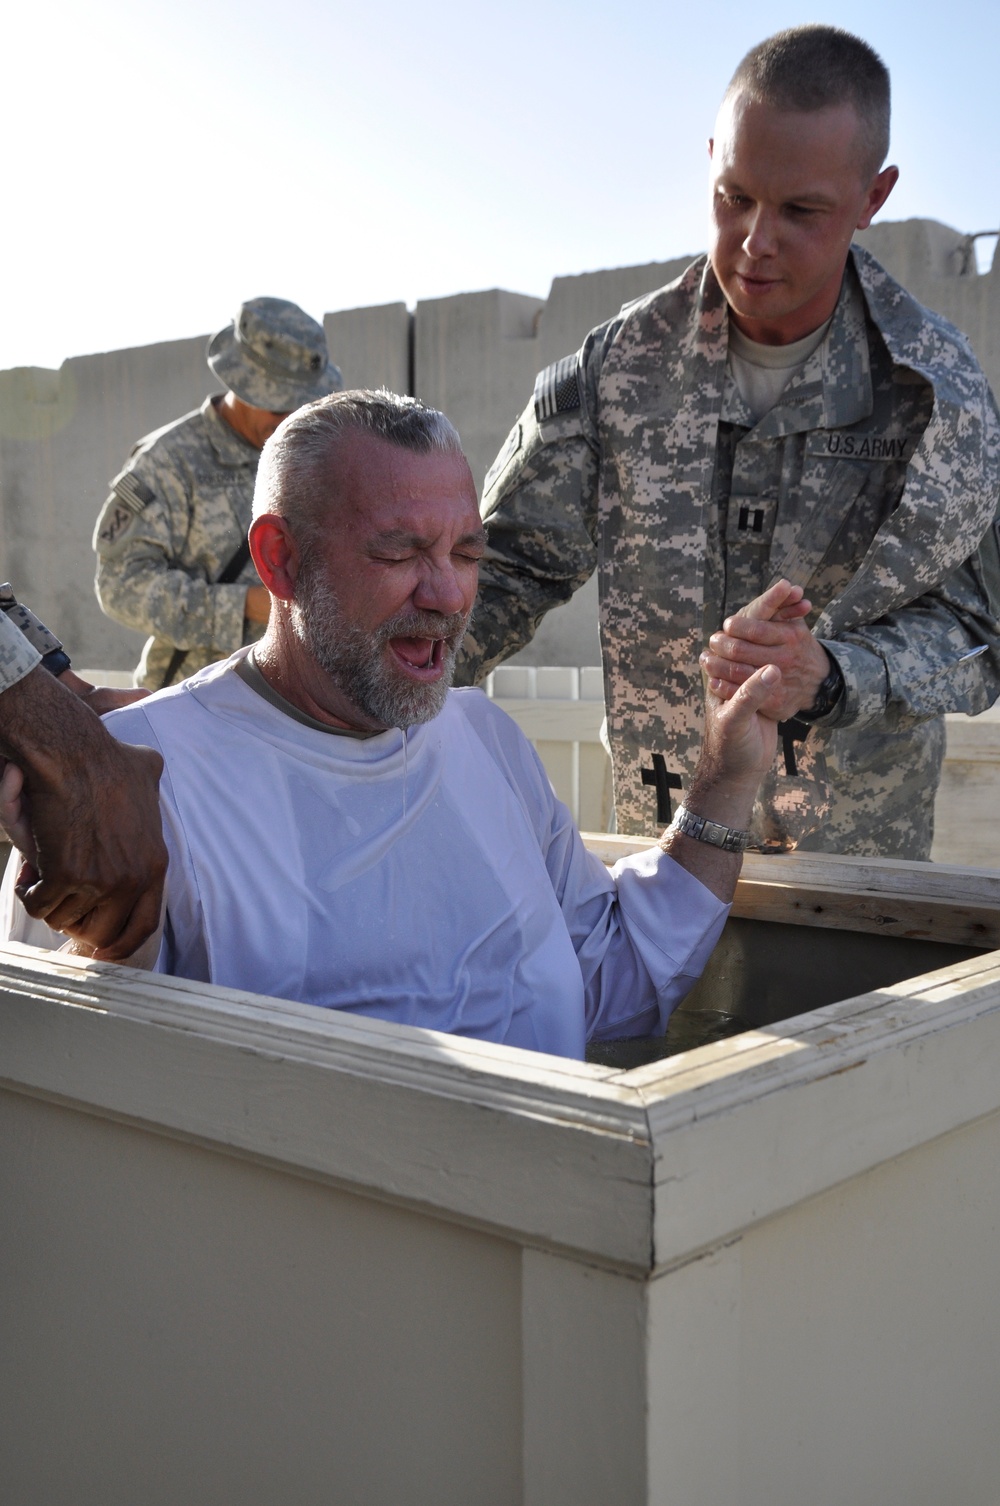 Chaplain Ministers to Soldiers, Prisoners